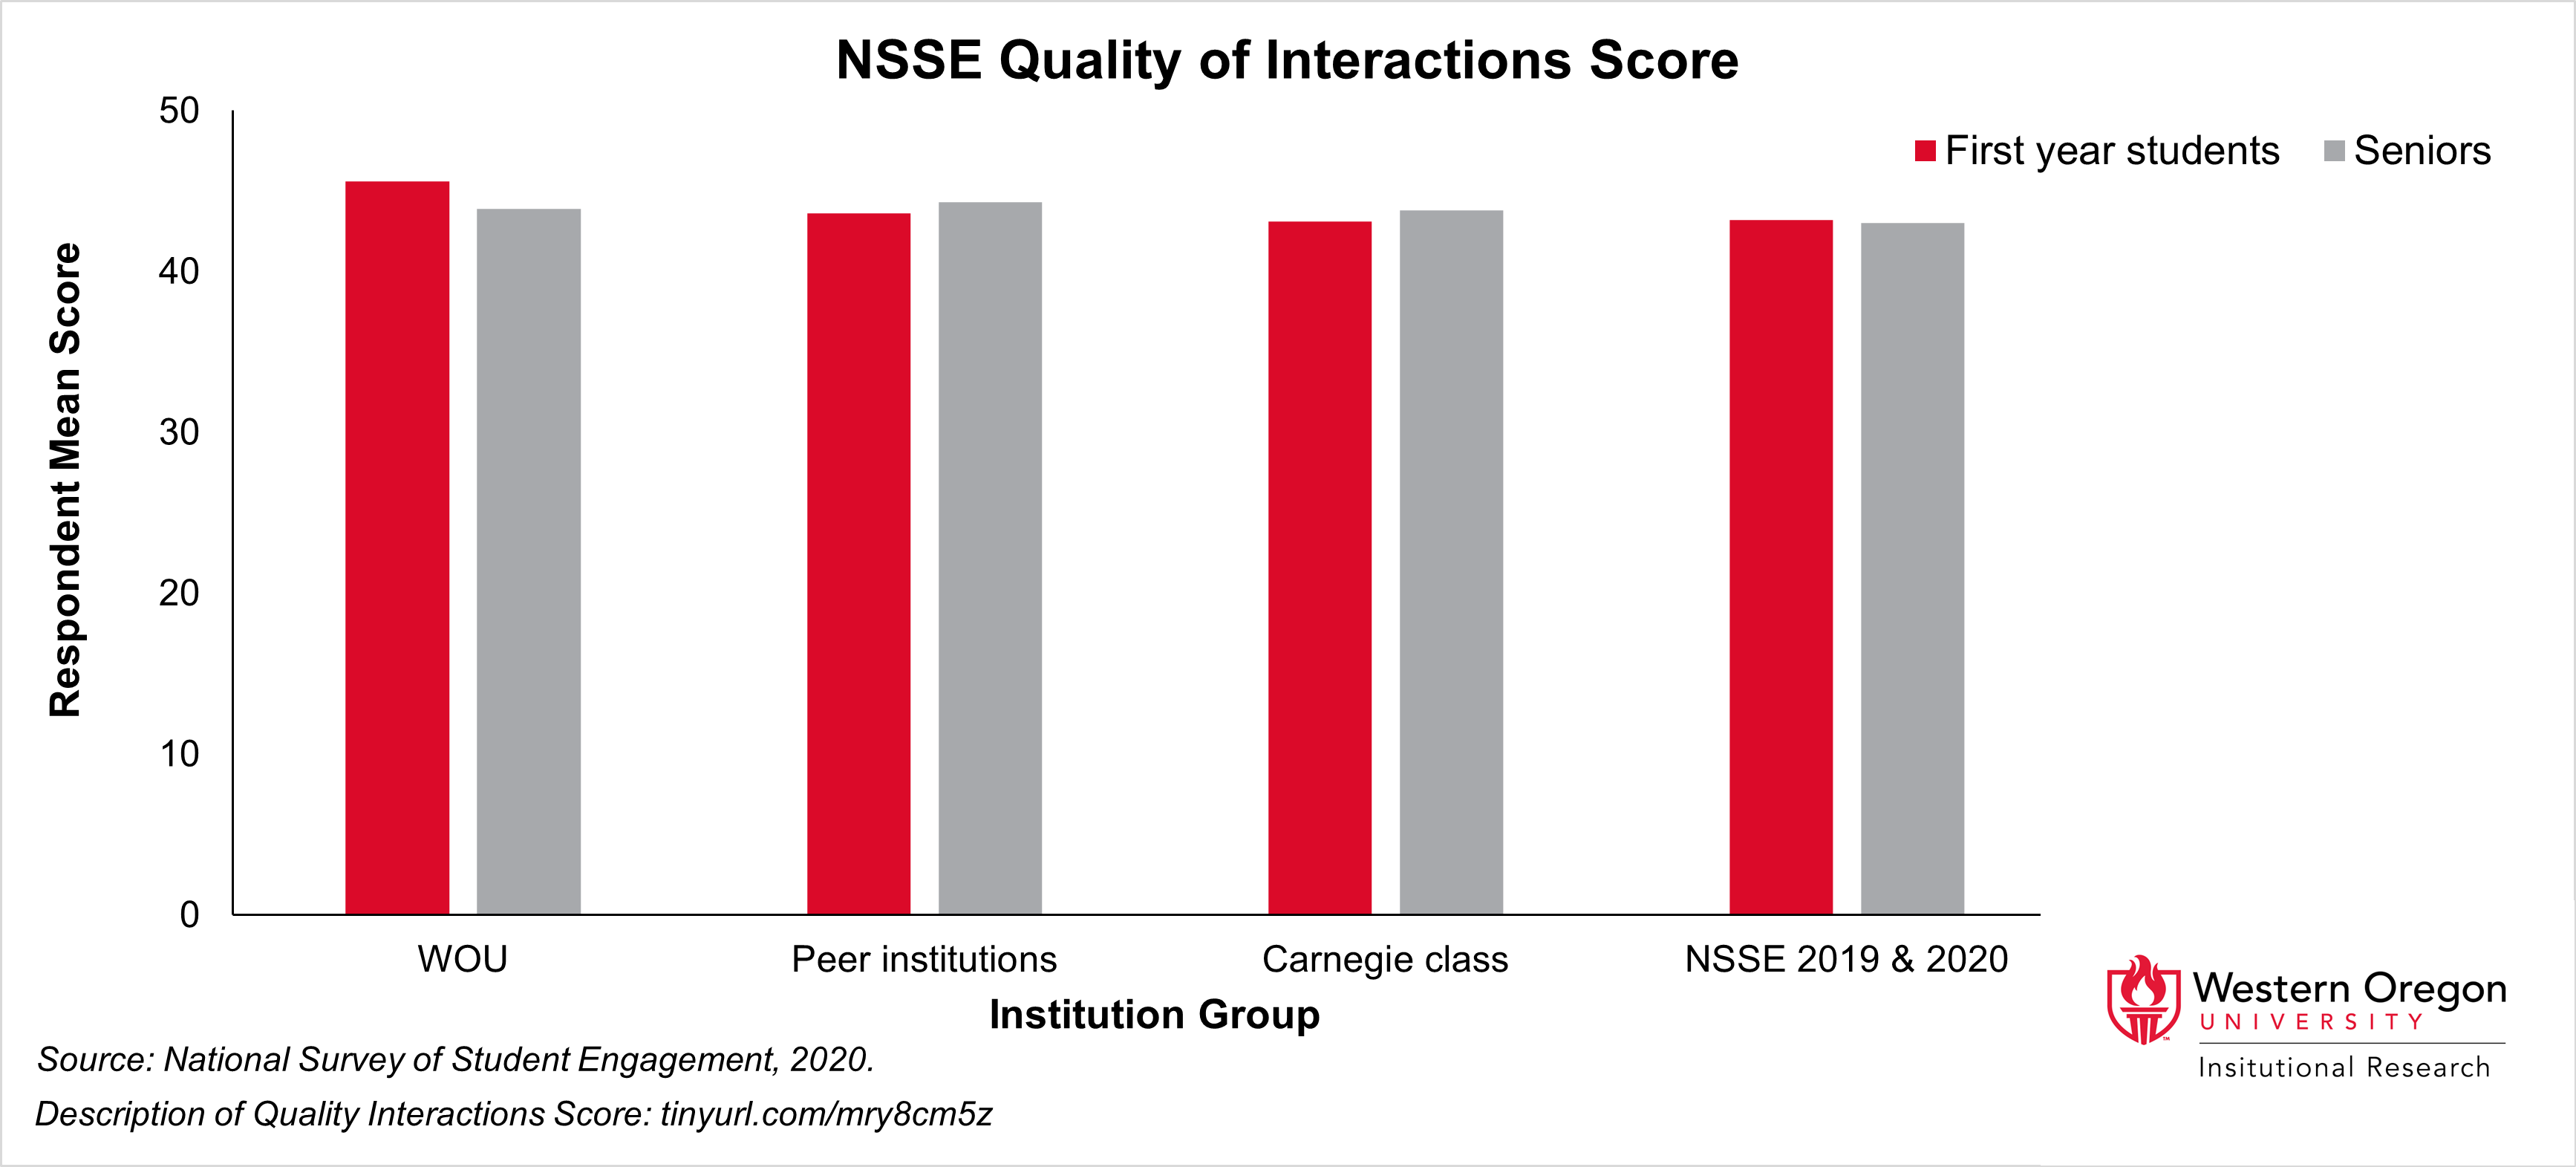 Bar chart comparing respondent mean NSSE score of quality of interactions for first years and seniors between WOU, peer insitutions, carnegie class, and NSSE 2019 and 2020. All have relatively similar mean scores. Description of score: tinyurl.com/mry8cm5z